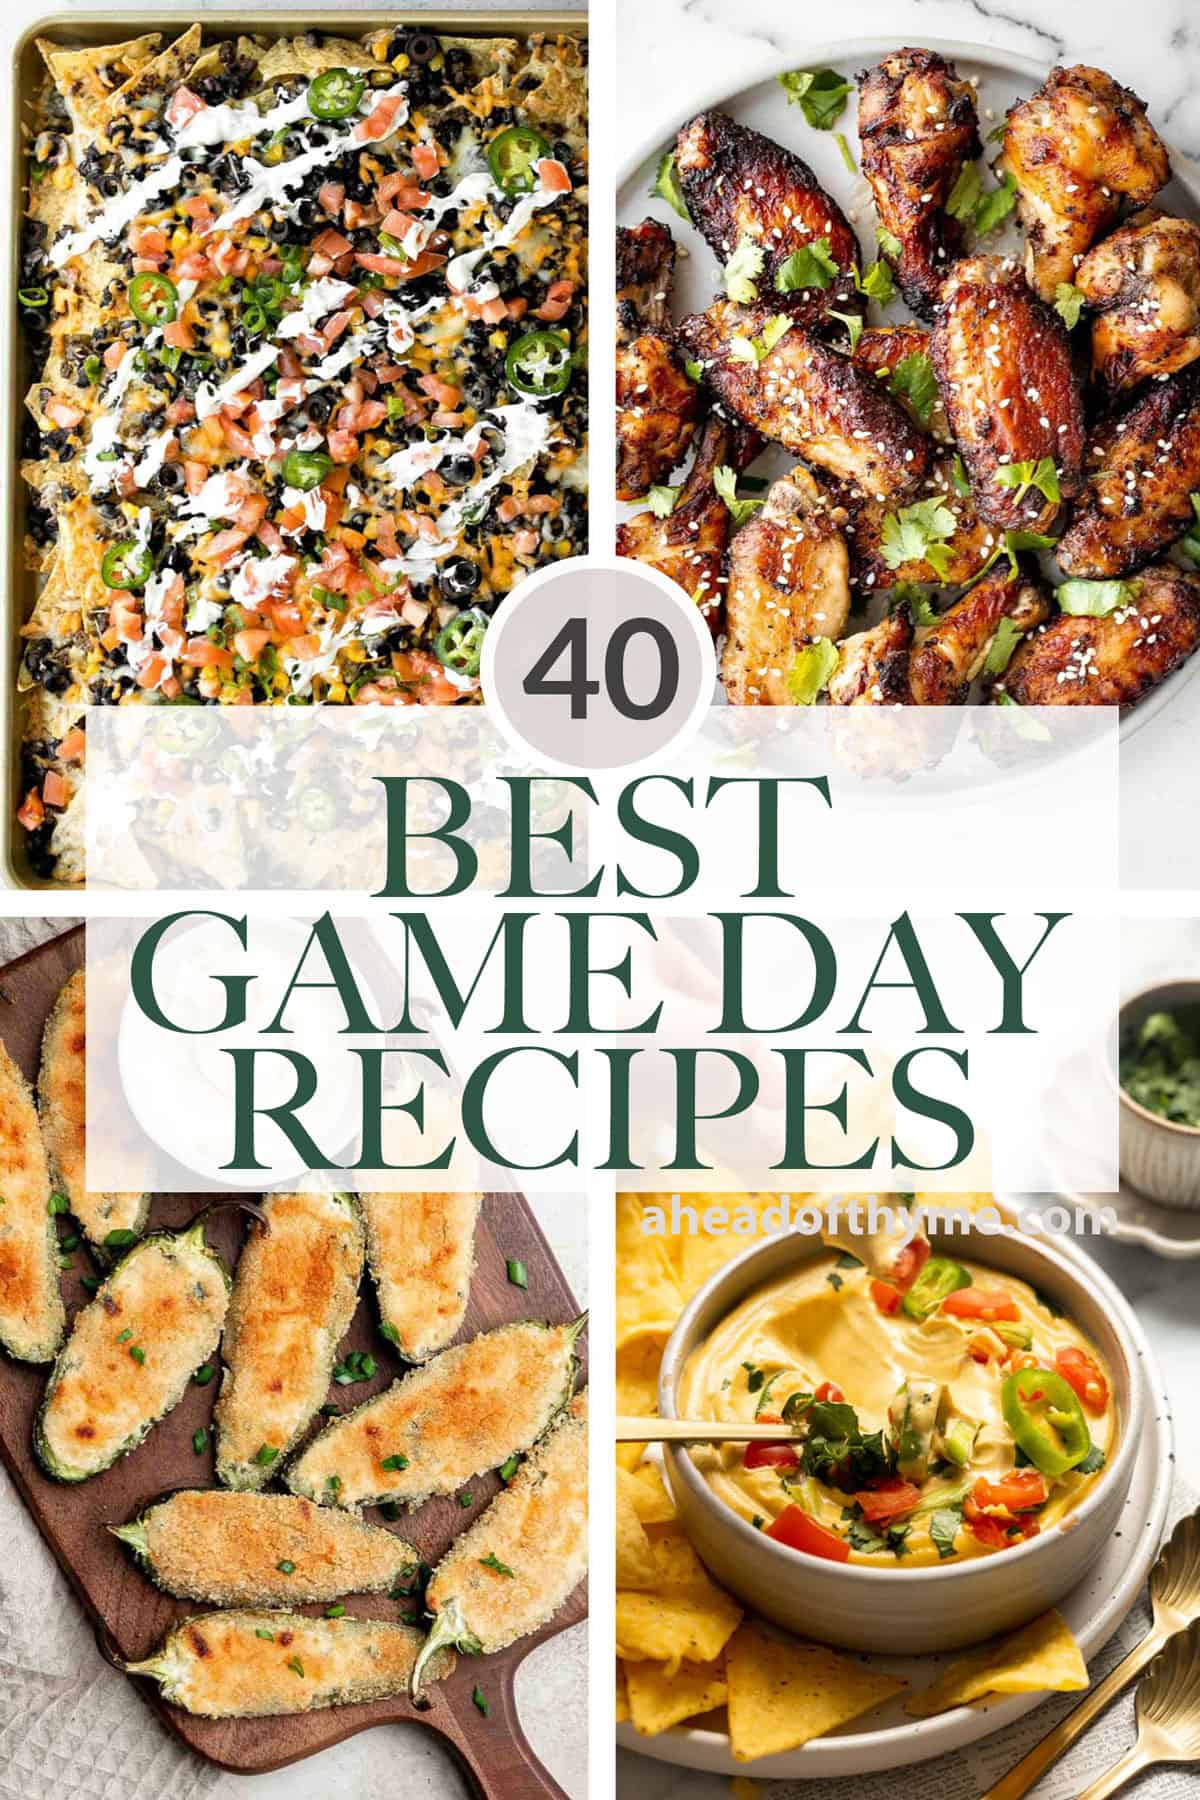 Over 40 best game day recipes including cheesy dips, classic chicken wings, bite-sized appetizers. and more to enjoy while you root for your team. | aheadofthyme.com